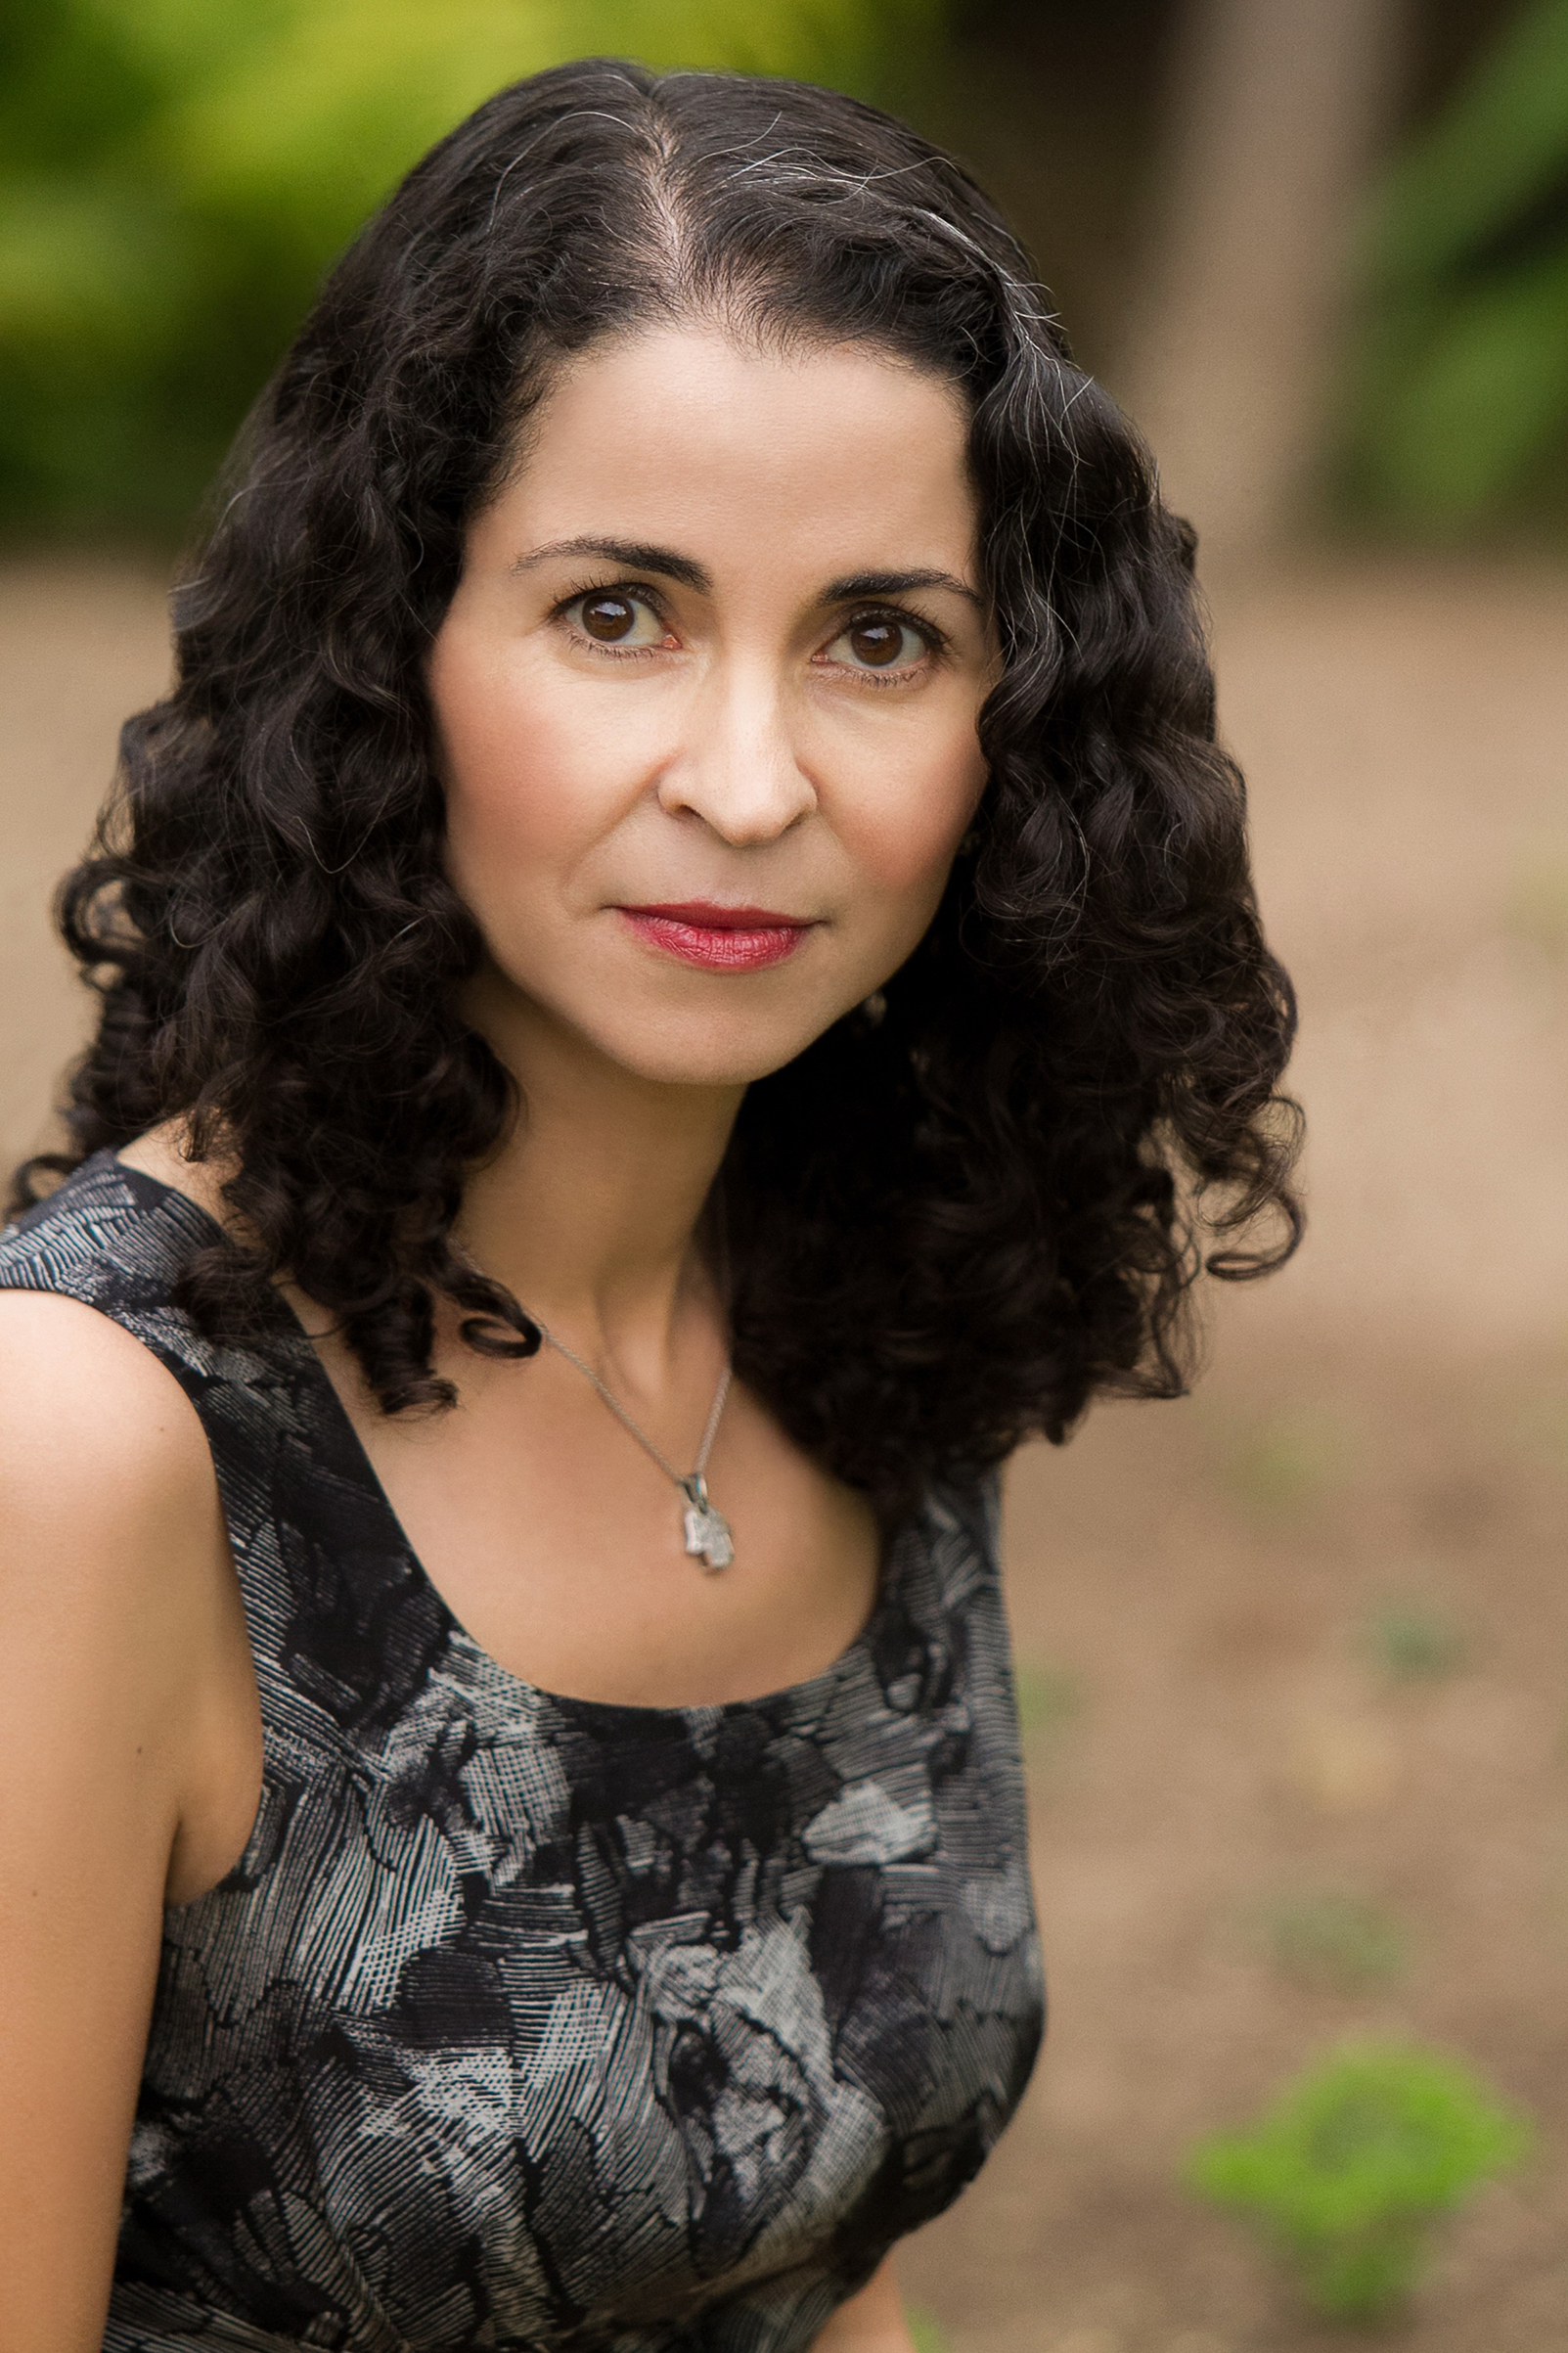 The decorated novelist teaches writing at the University of California (April Rocha)